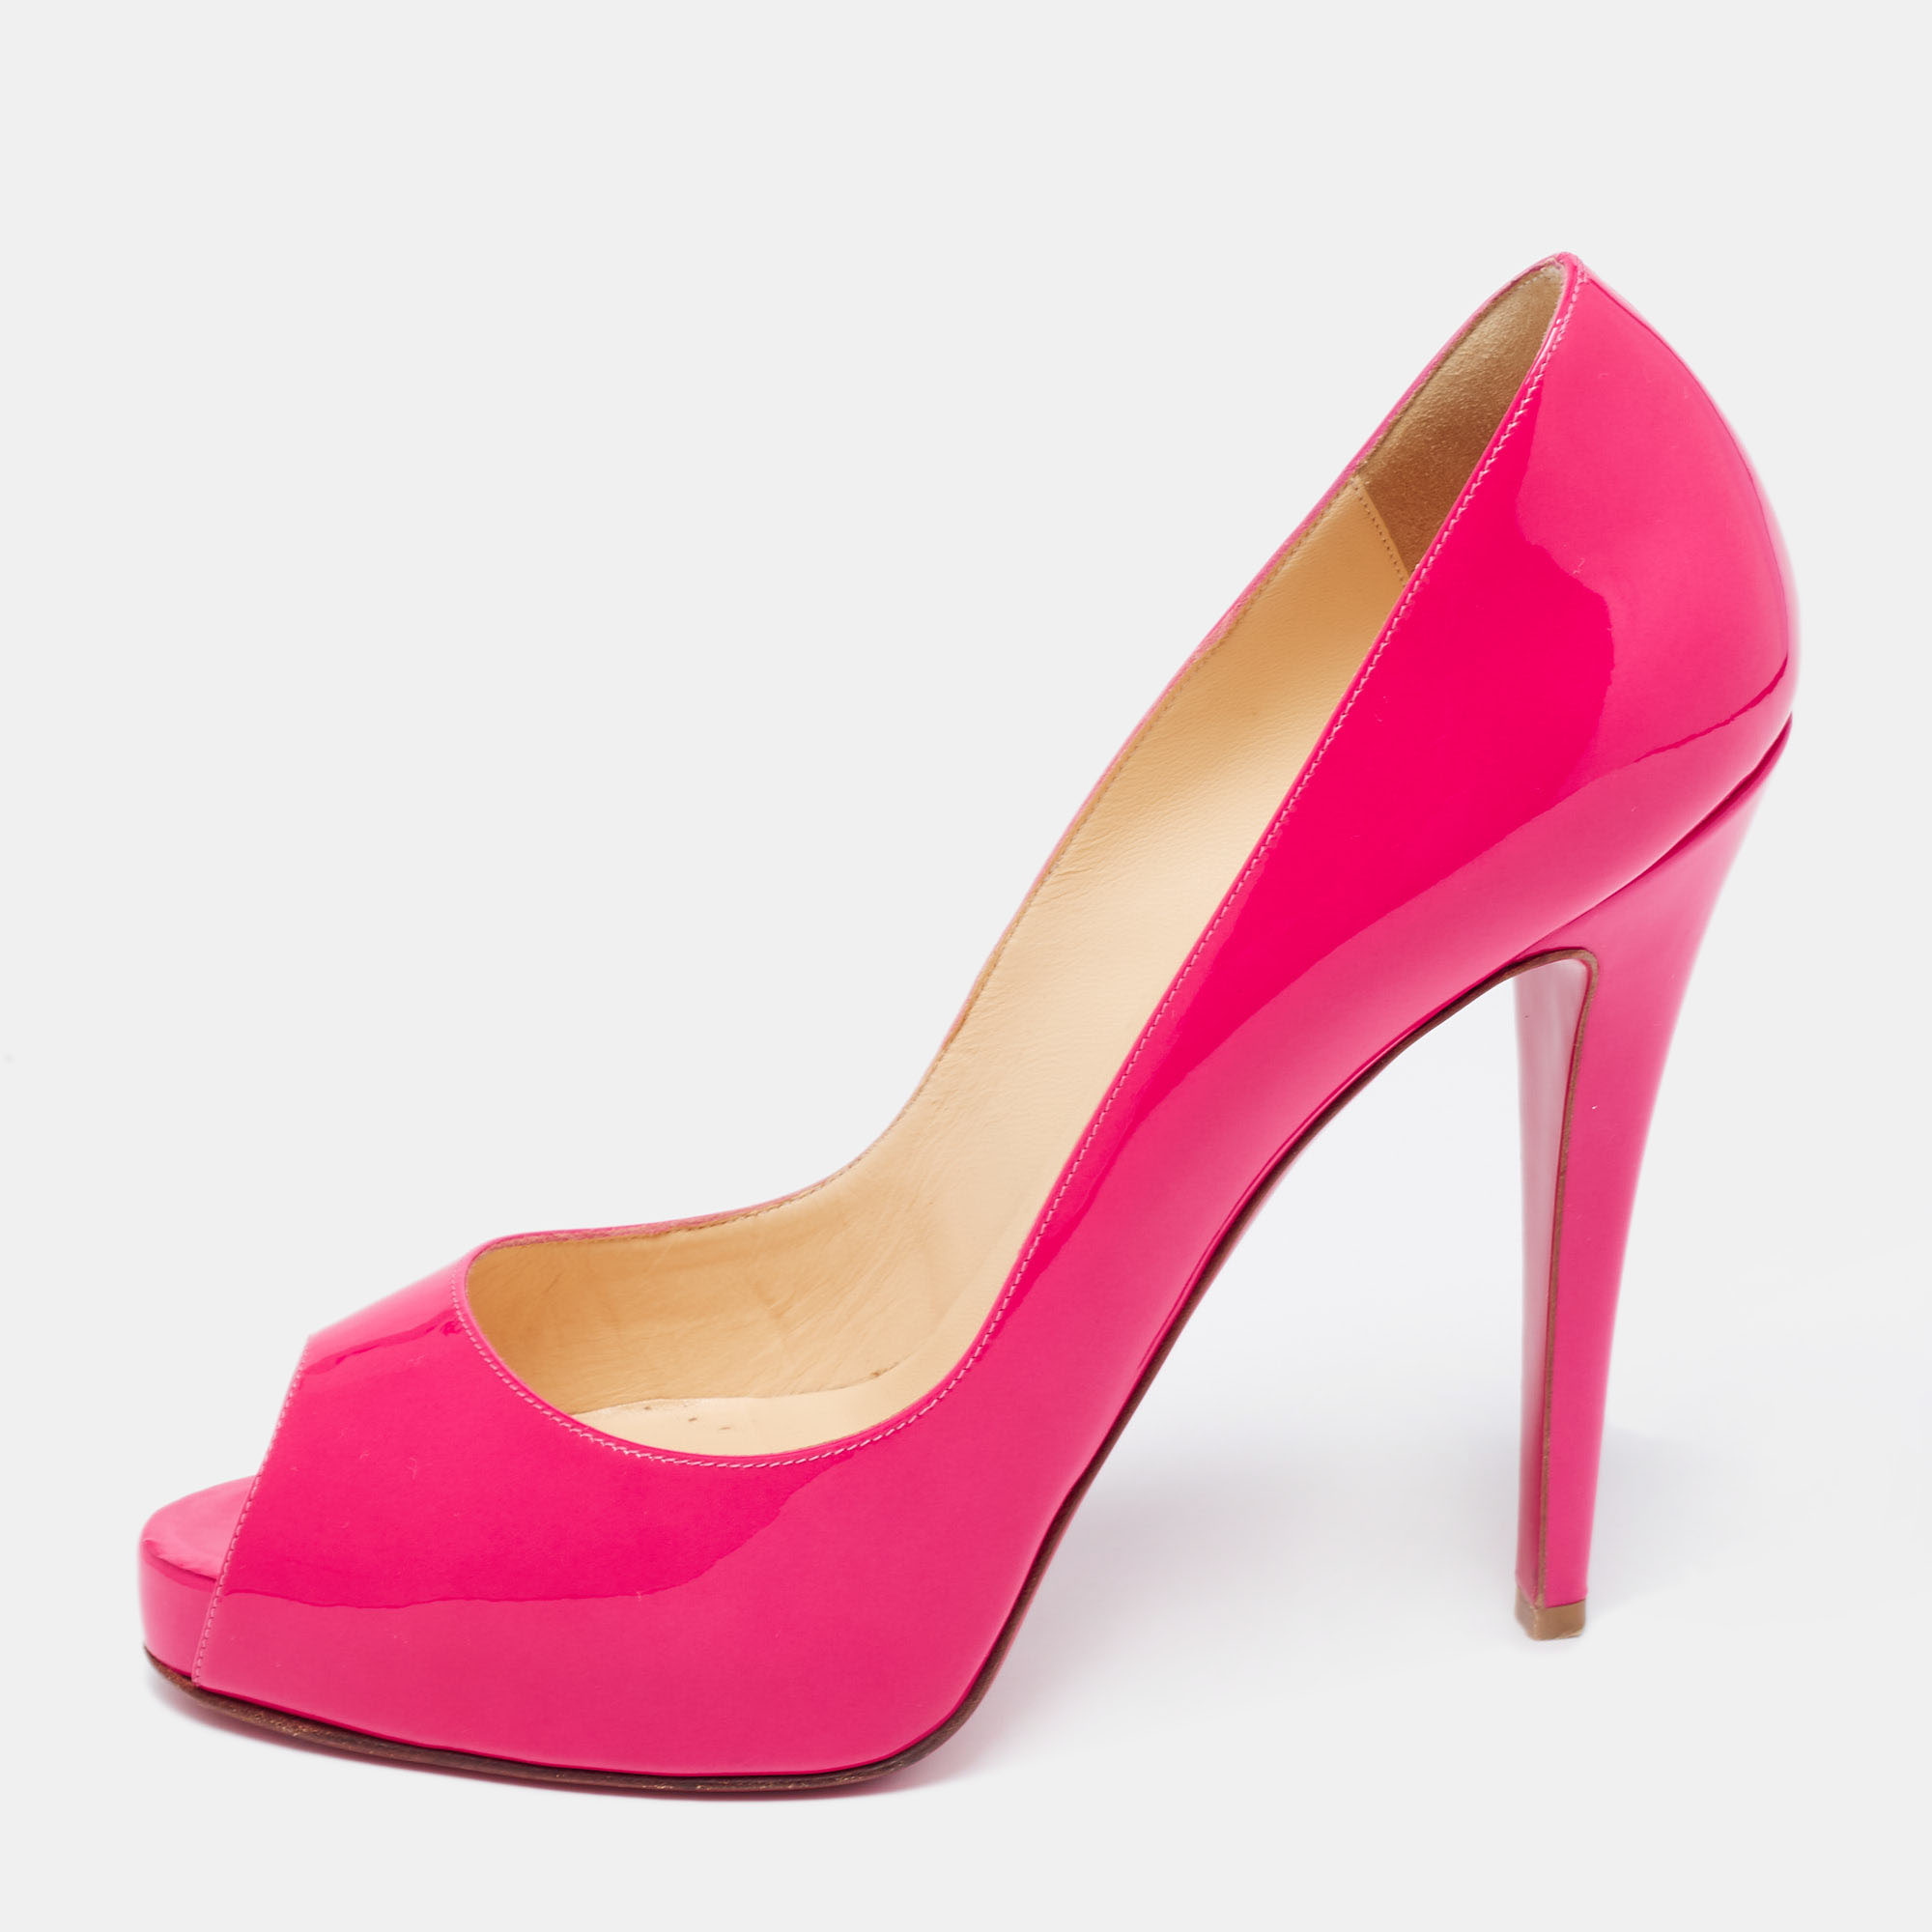 

Christian Louboutin Pink Patent Leather New Very Prive Peep Toe Platform Pumps Size